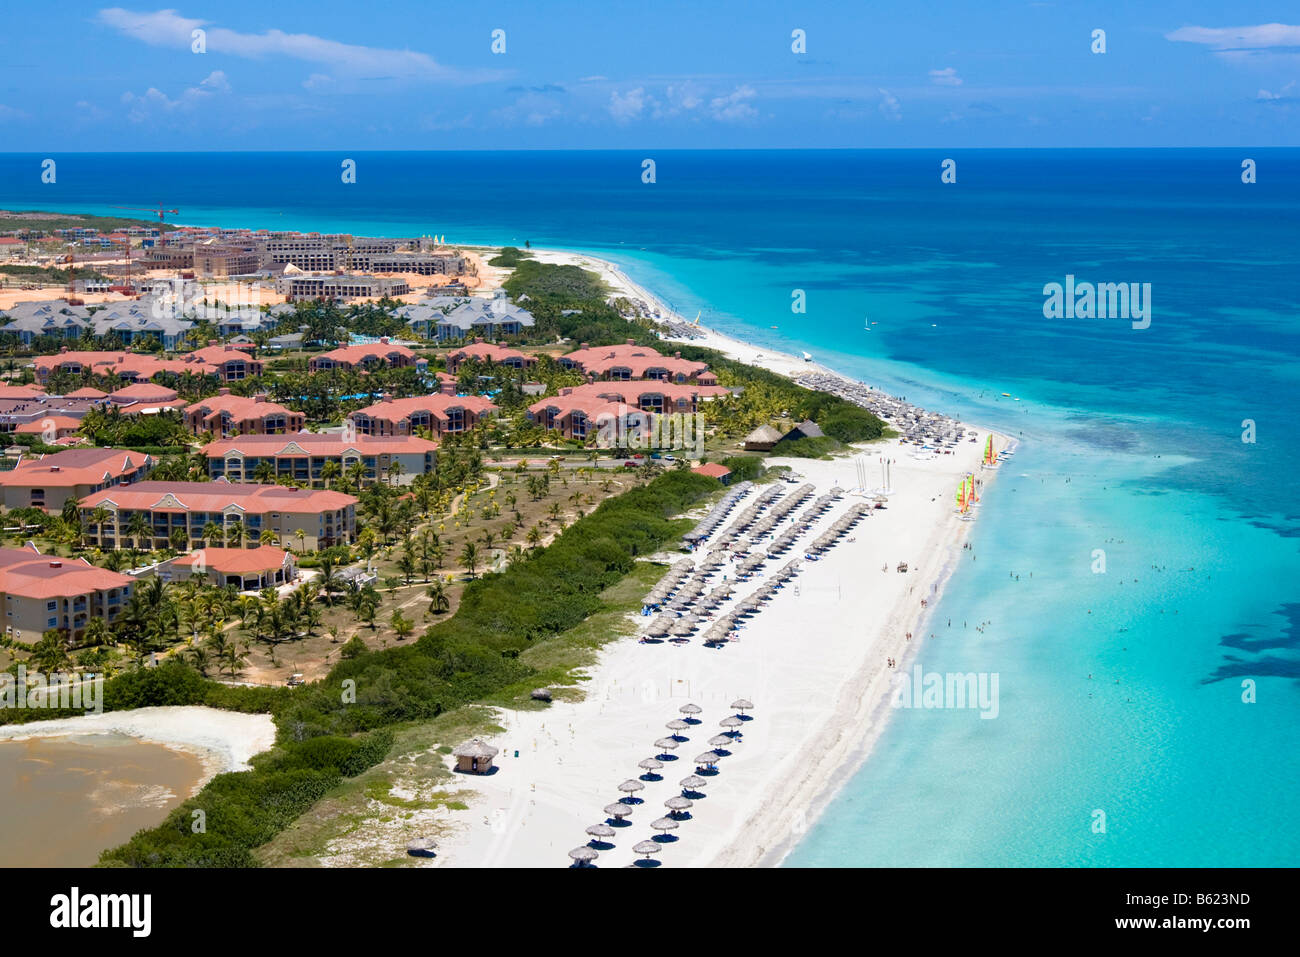 Luxury Hotels with a white beach on Varadero, Cuba, Caribbean, Central America, America Stock Photo